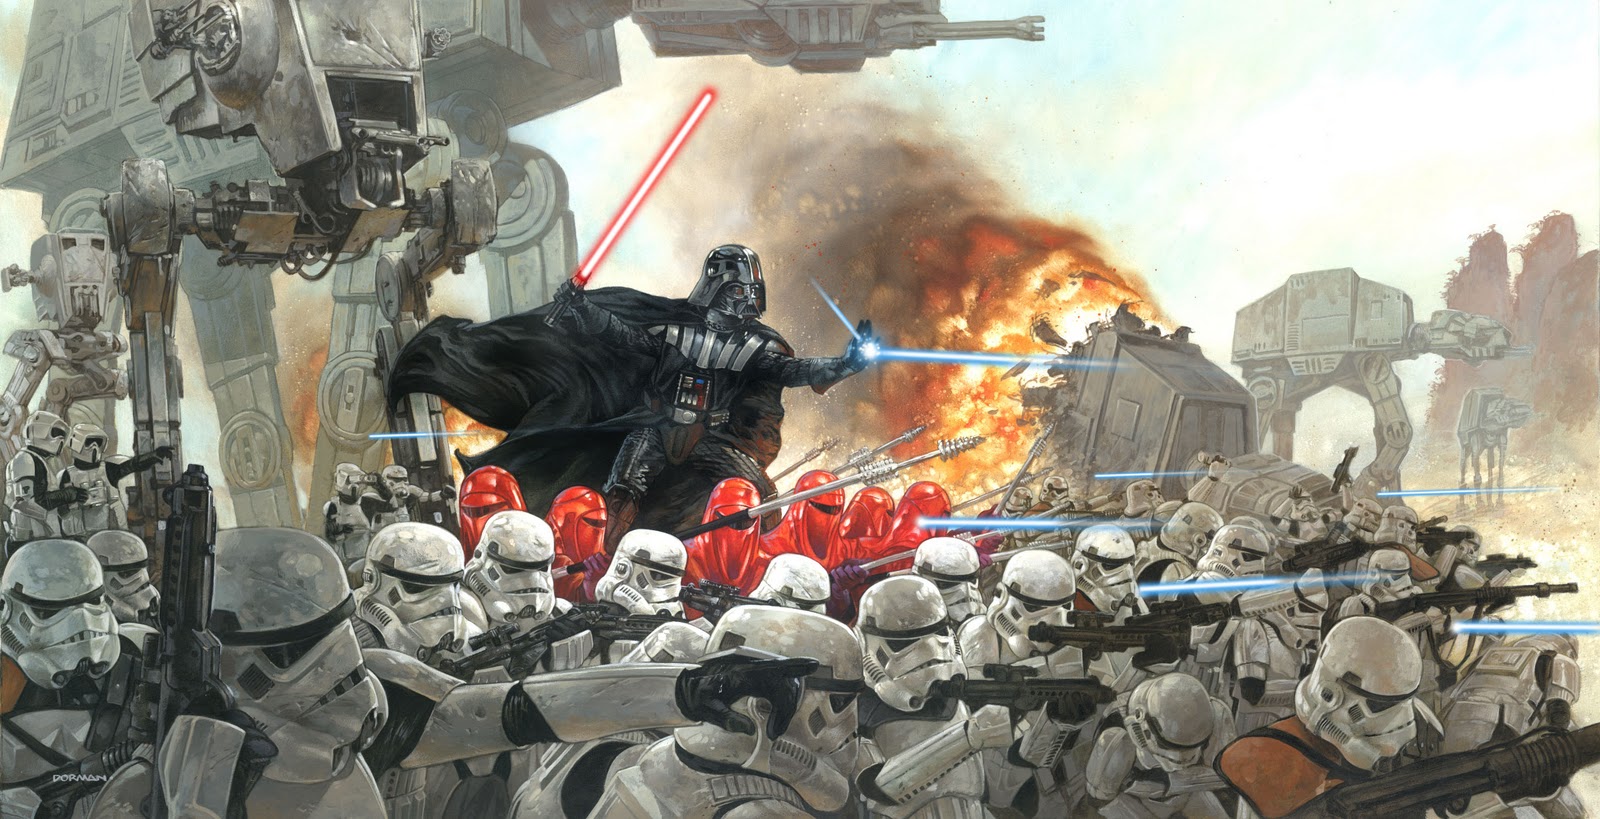 vader_s_fist_by_bloodrave1984-db3qltf.jpg